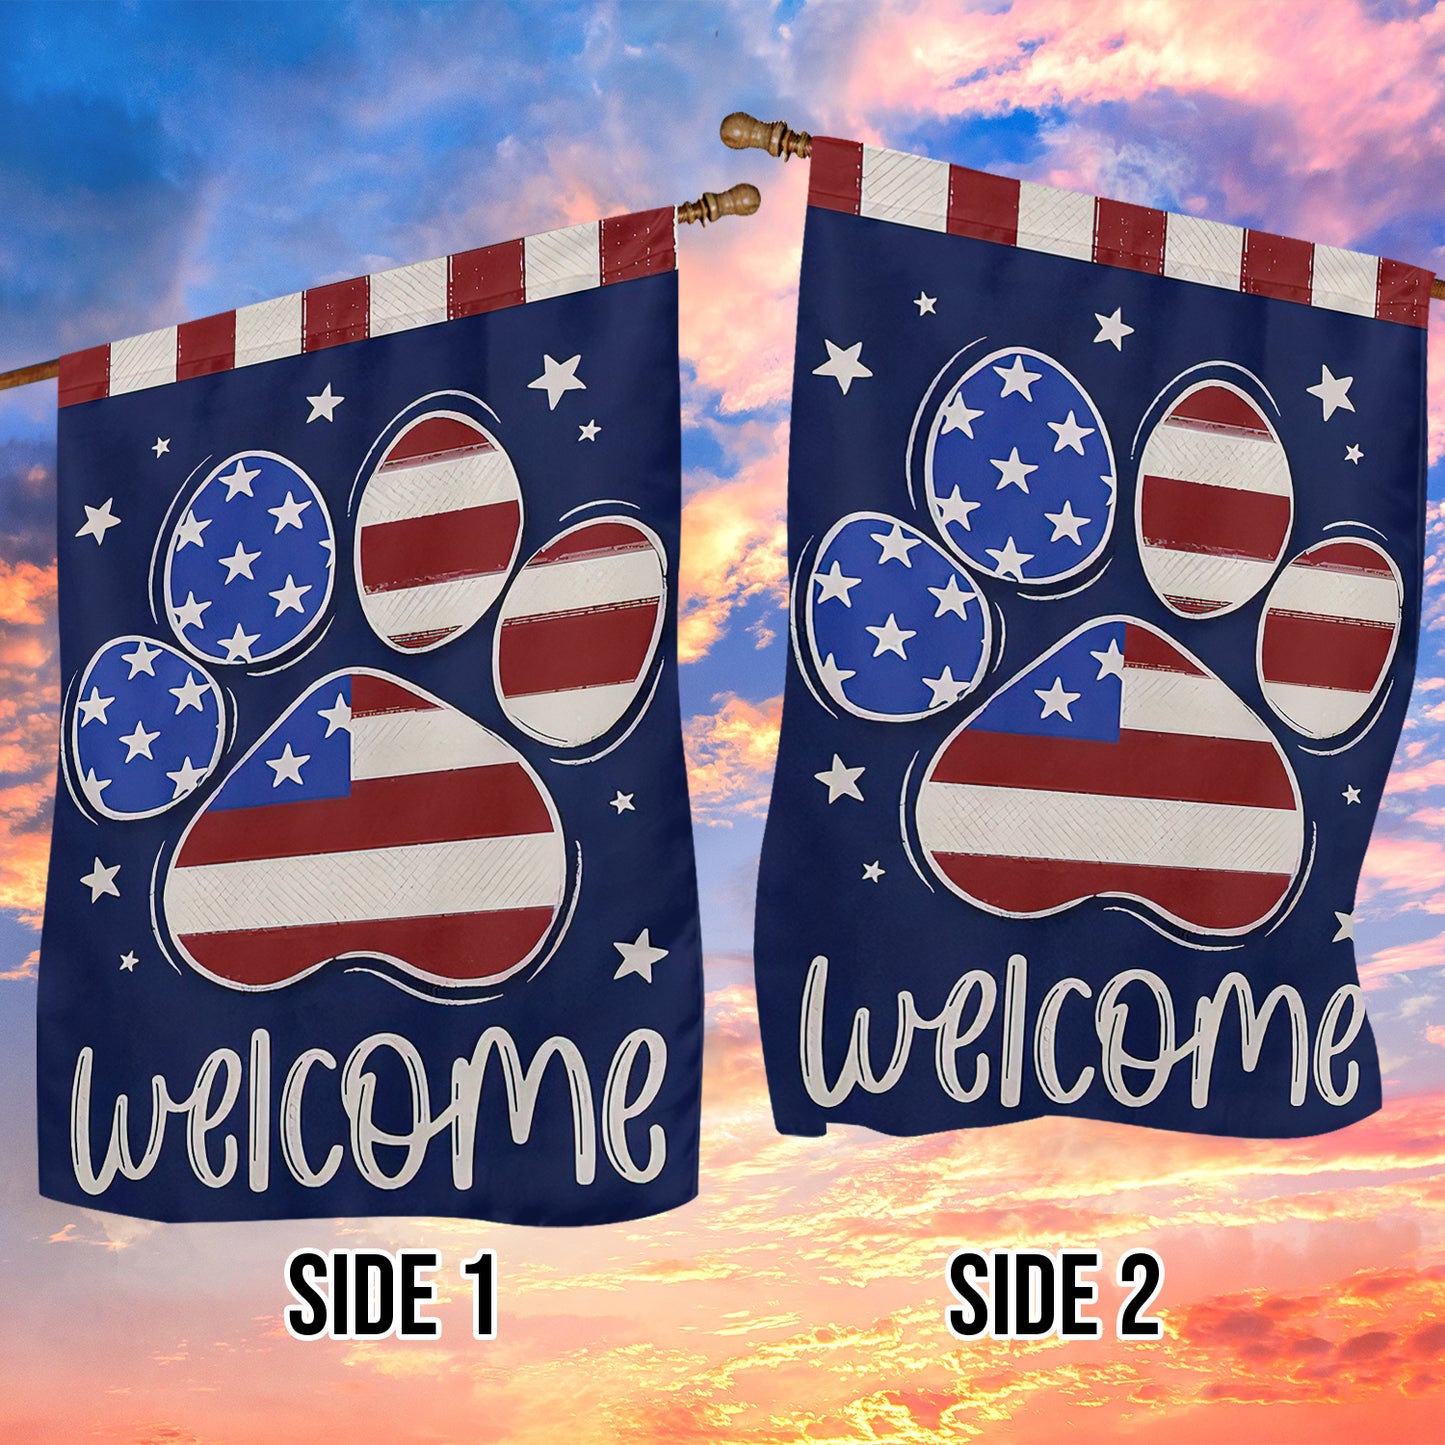 July 4th Dog Garden Flag House Flag, Dogshoe Welcome, Independence Day Yard Flag Gift For Dog Lovers